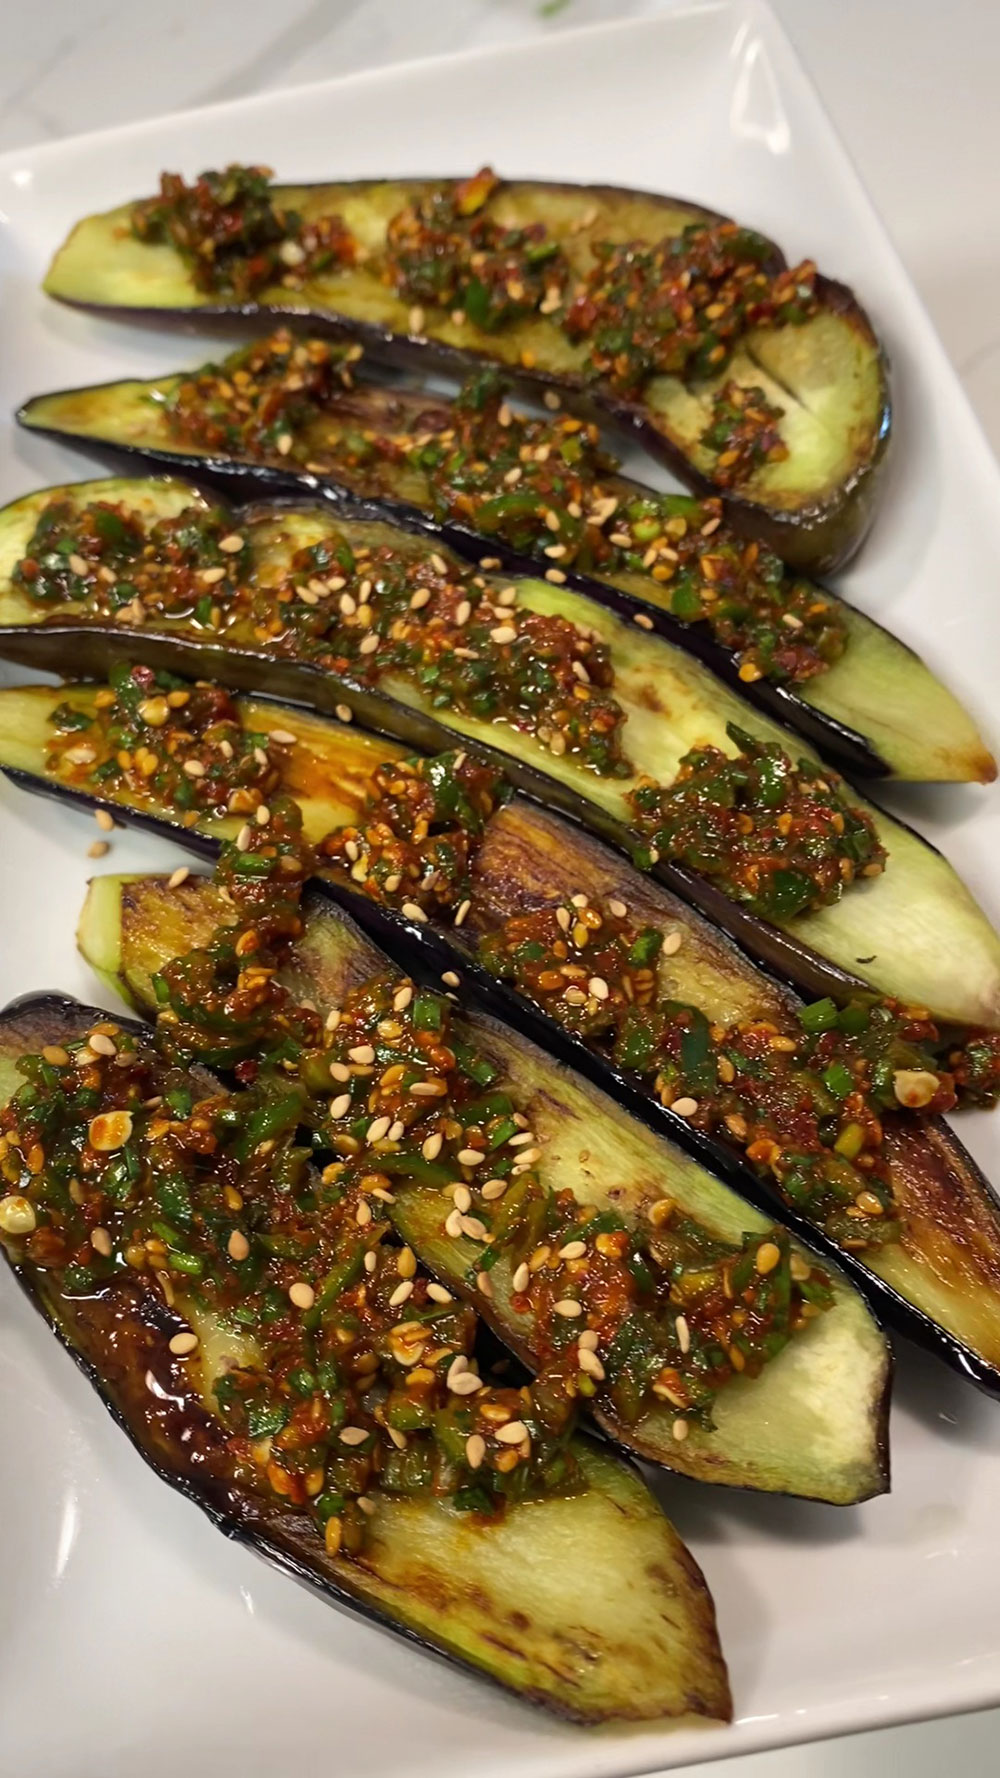 Fried Eggplant with Pepper and Chive Sauce